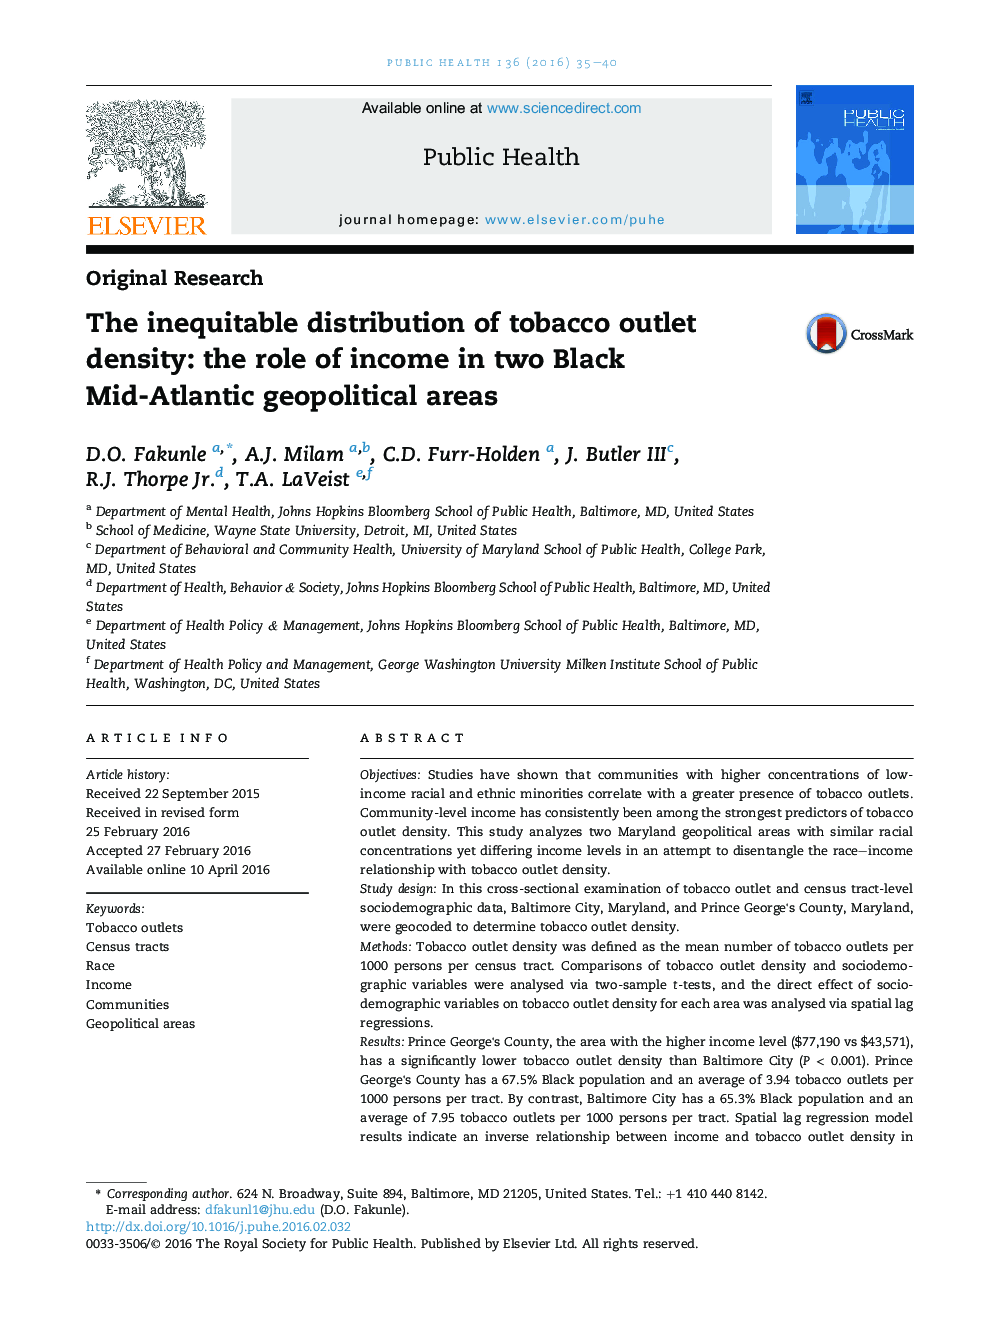 The inequitable distribution of tobacco outlet density: the role of income in two Black Mid-Atlantic geopolitical areas